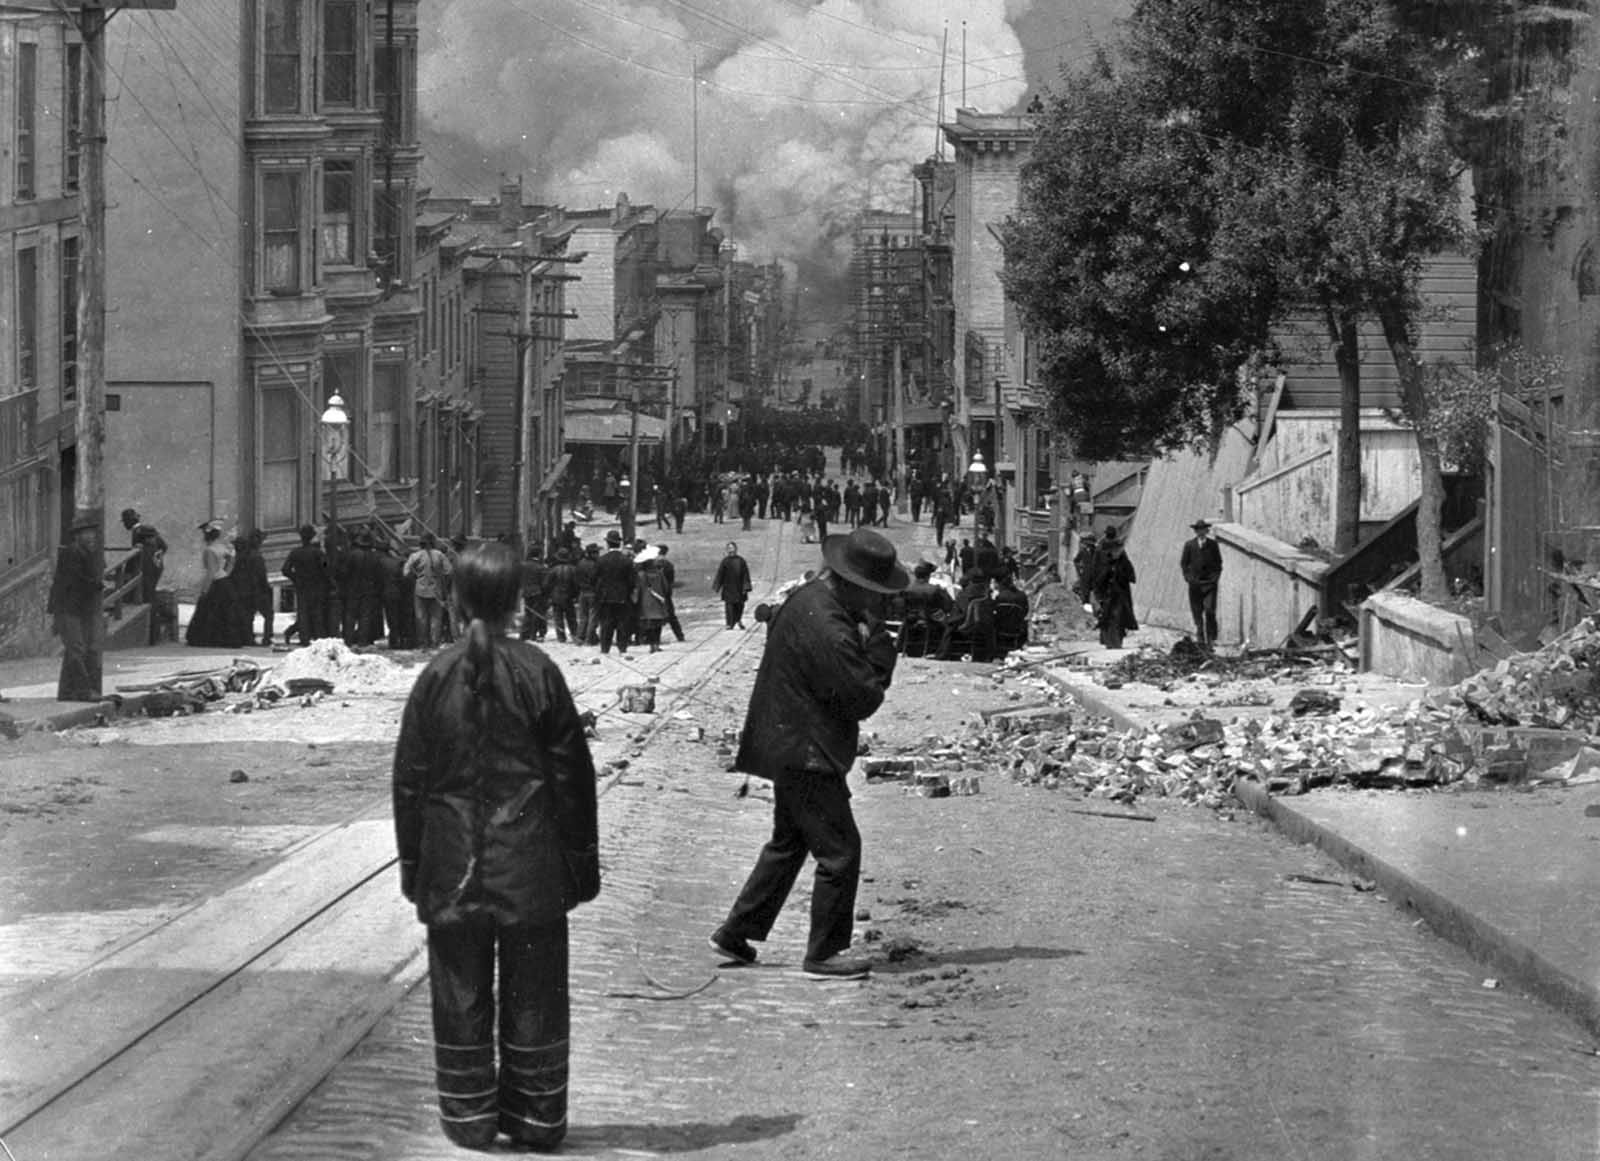 San Francisco residents stand in the rubble-strewn streets watching the fire grow after the earthquake struck on April 18, 1906.